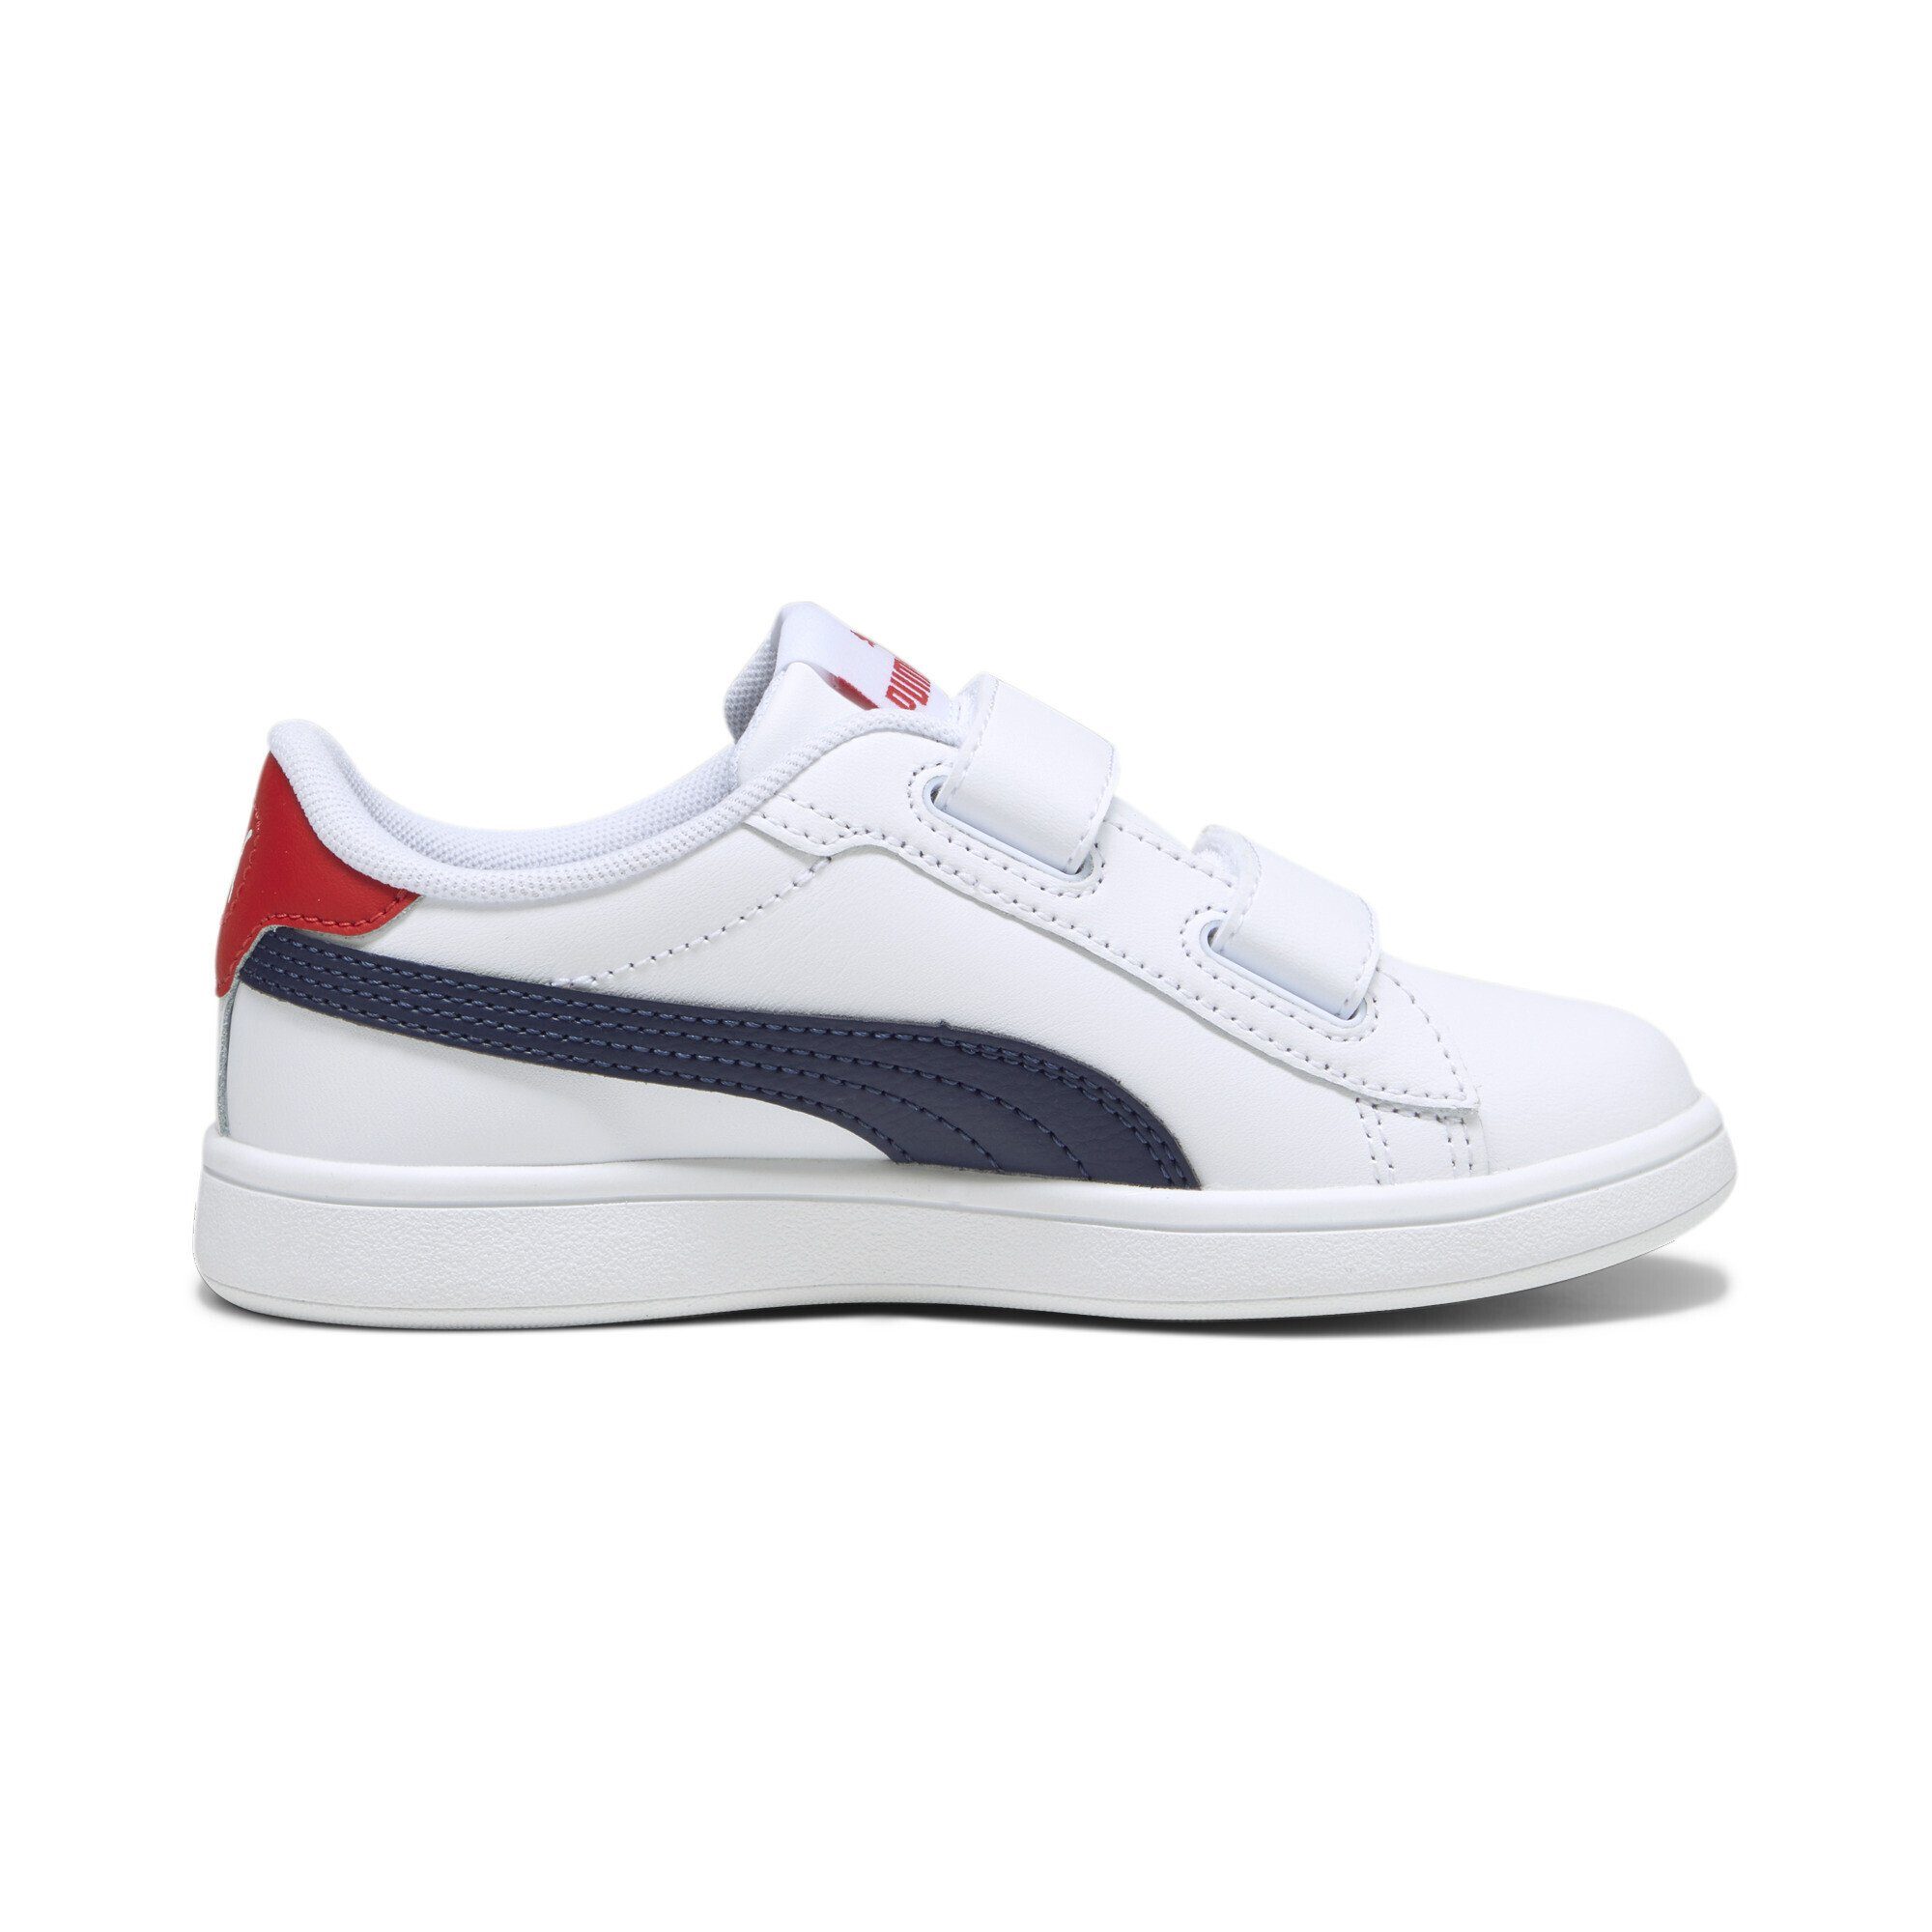 Red For Sneaker Navy White PUMA Time Smash Blue 3.0 Leather All Sneakers